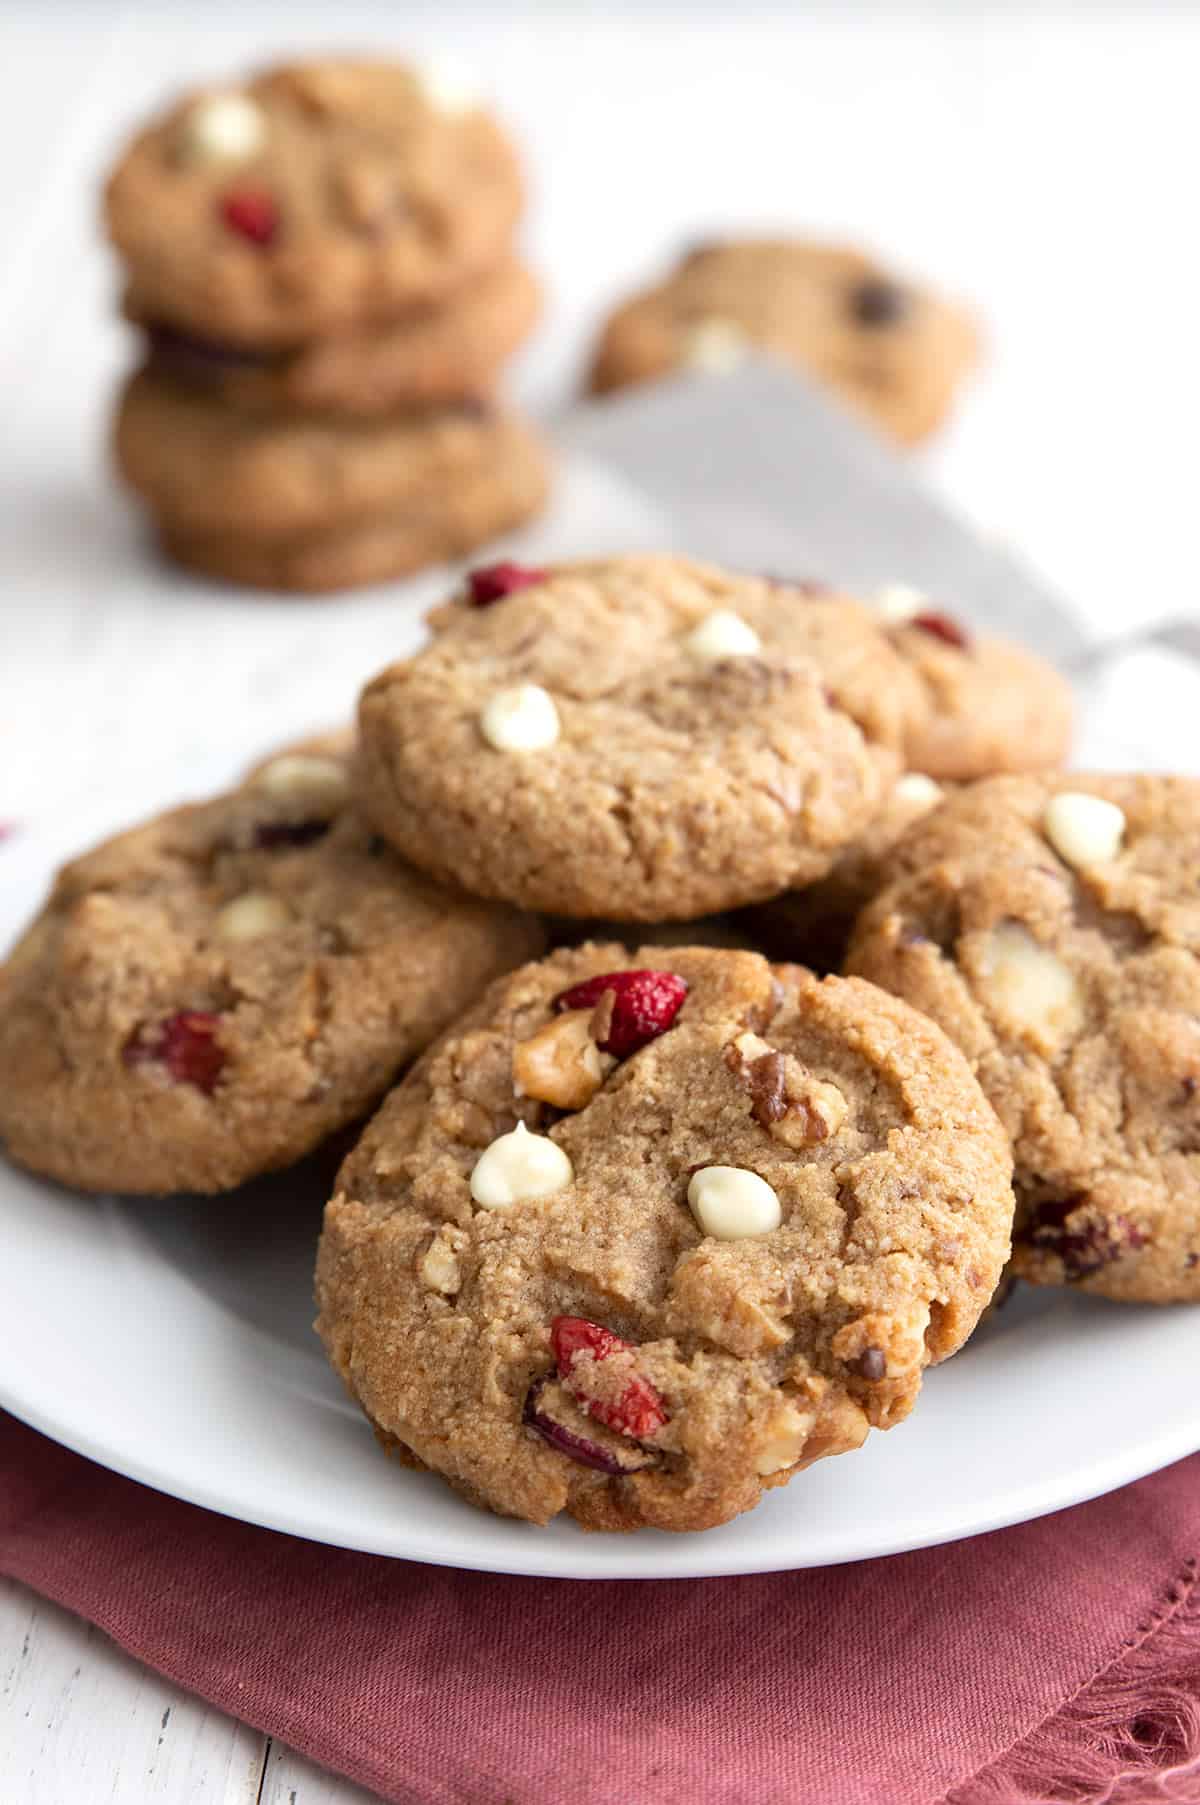 A plate of Keto White Chocolate Cranberry Cookies over a red napkin.